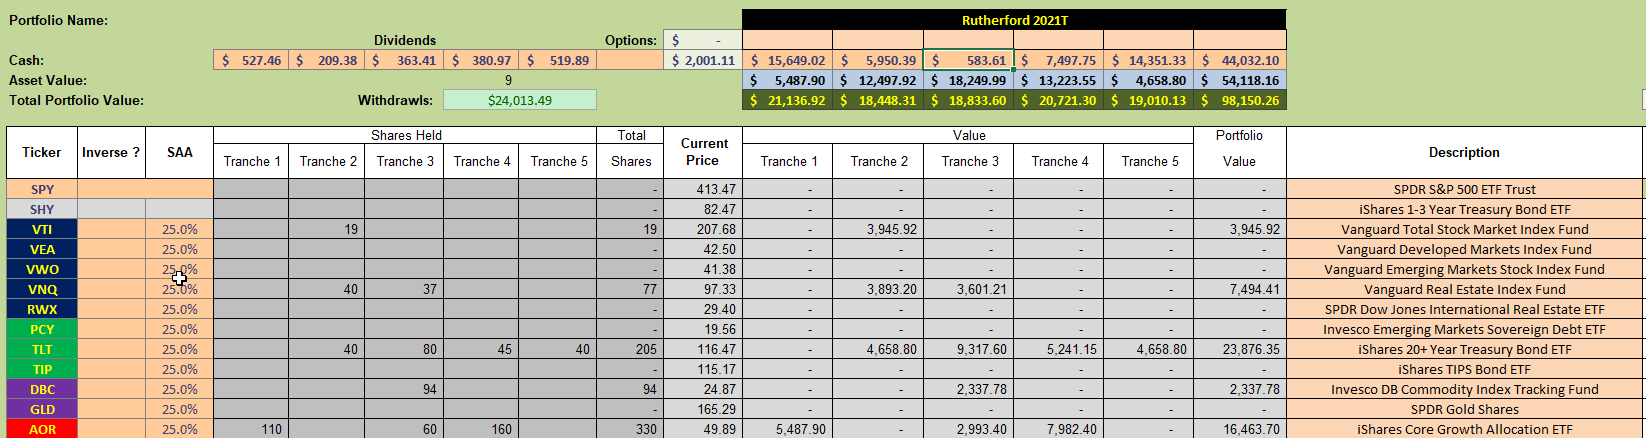 Rutherford Portfolio Review (Tranche 3): 5 August 2022 4